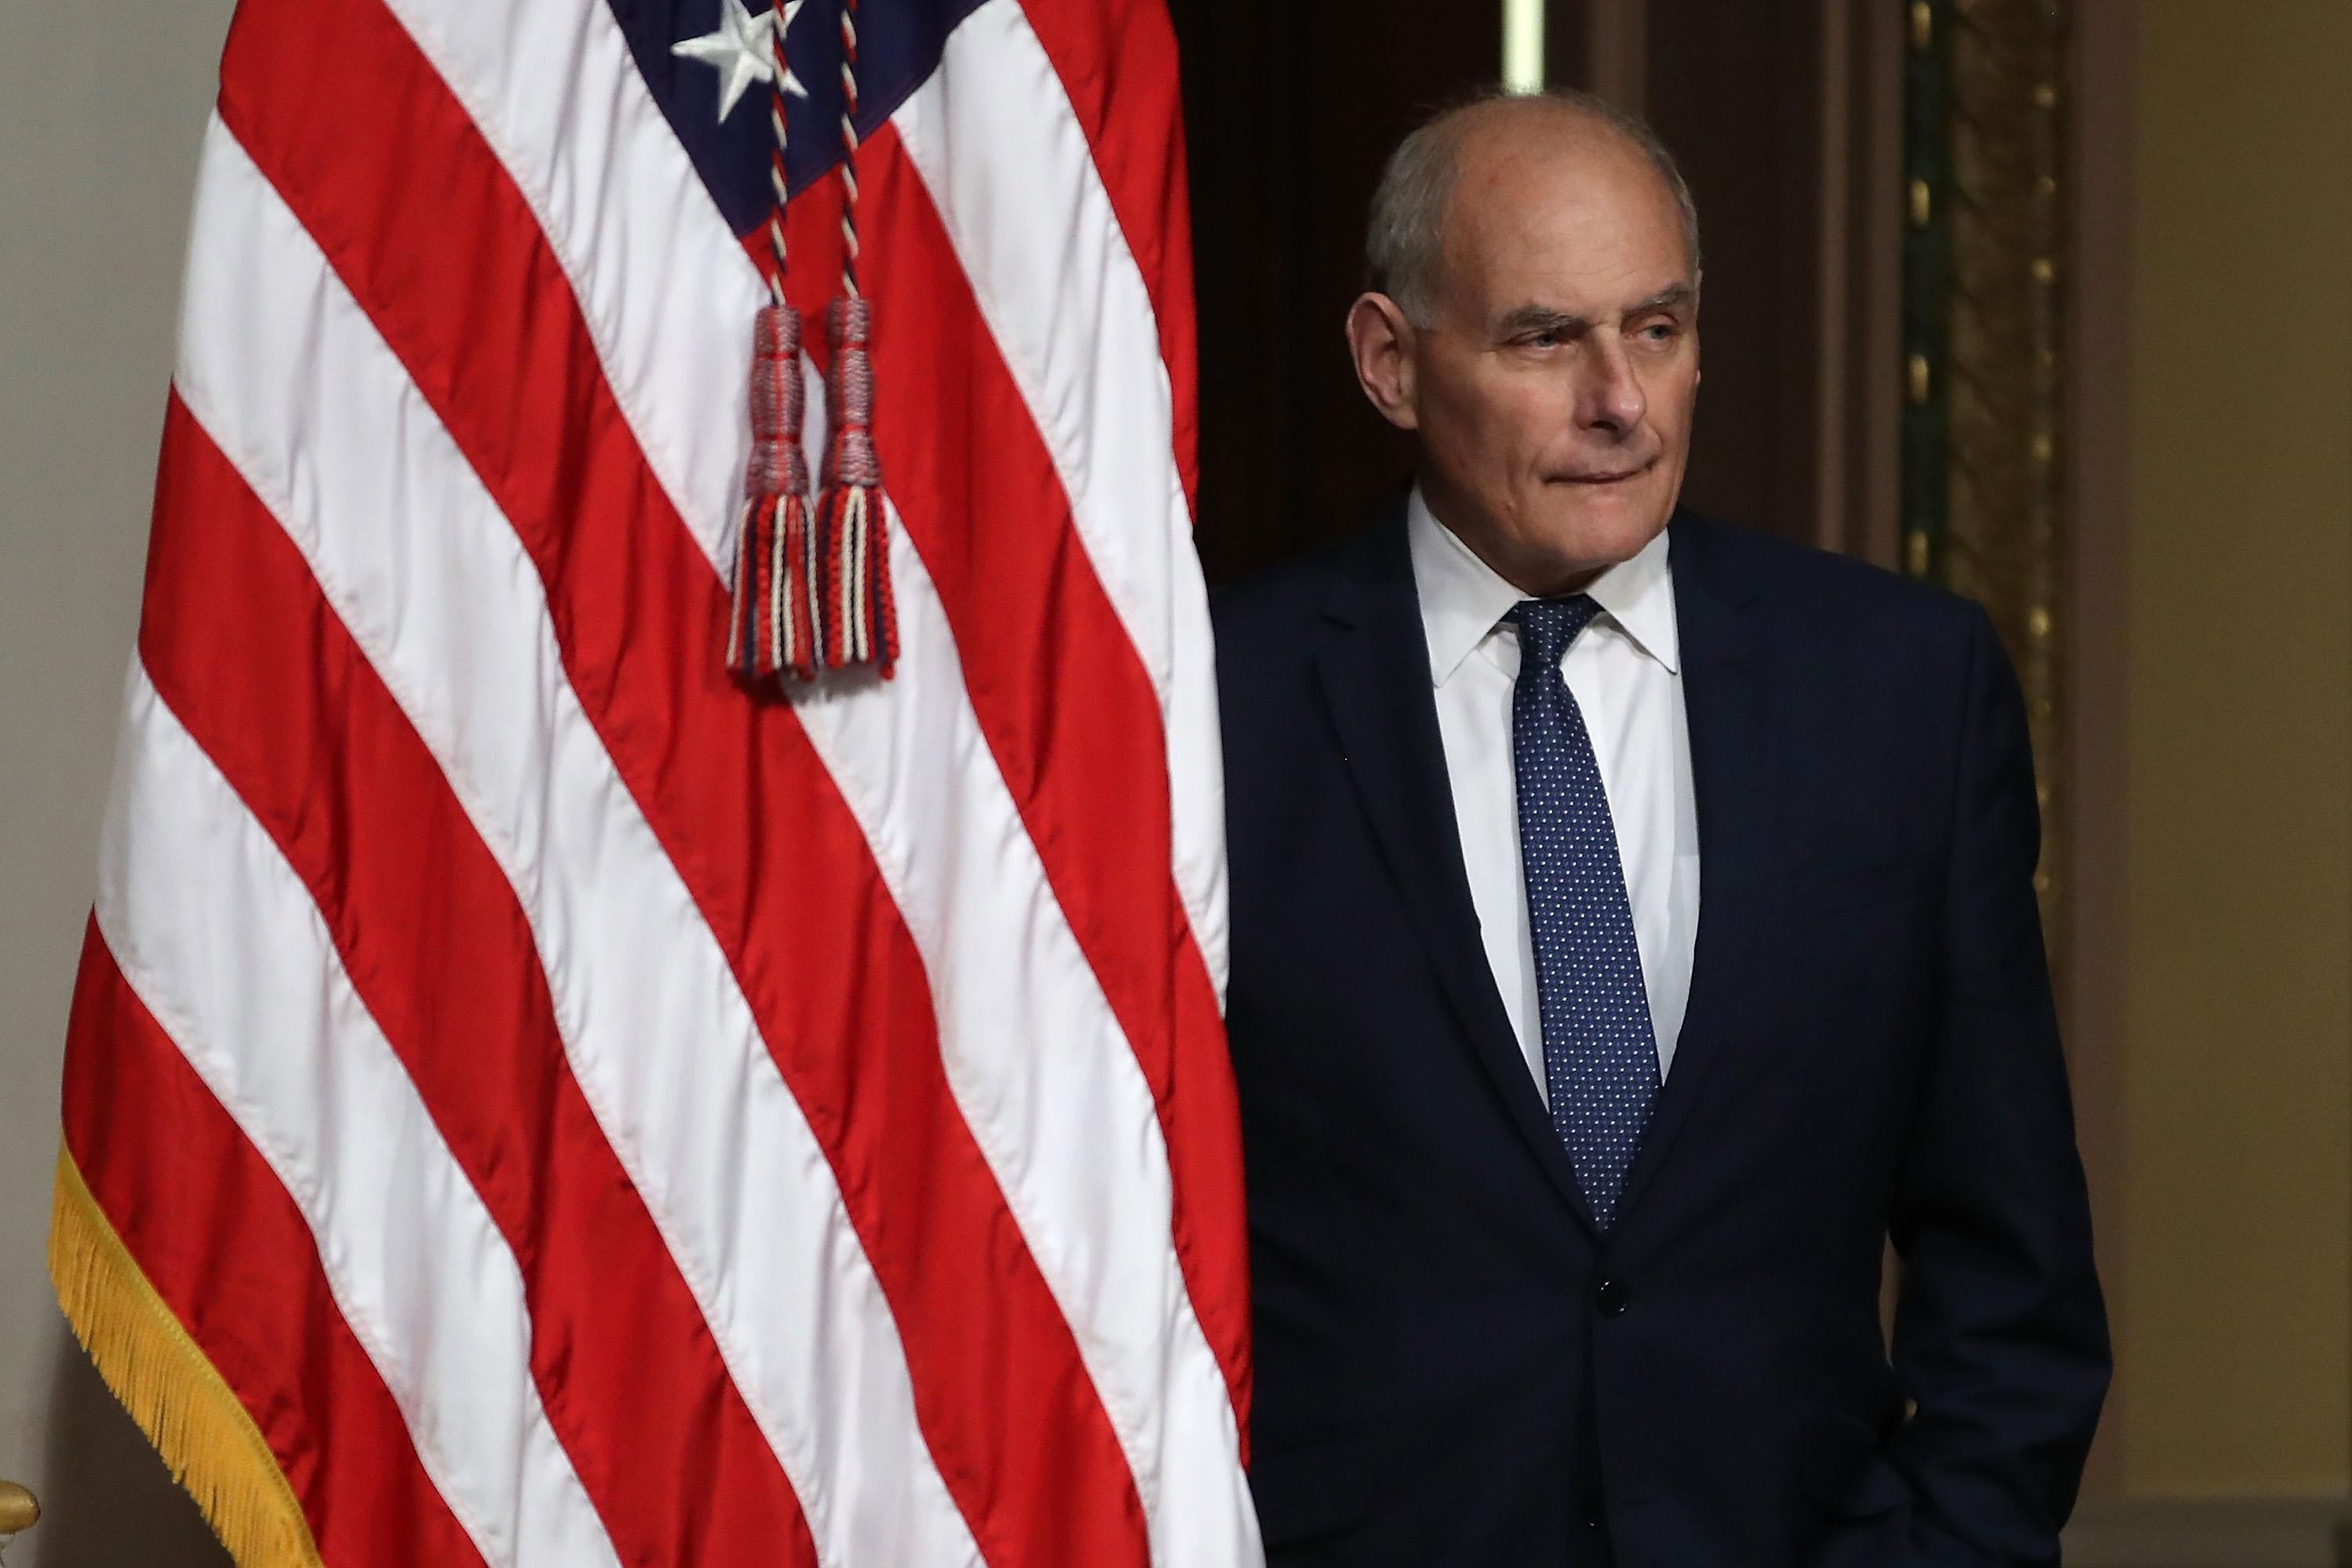 John Kelly stands next to an American flag.